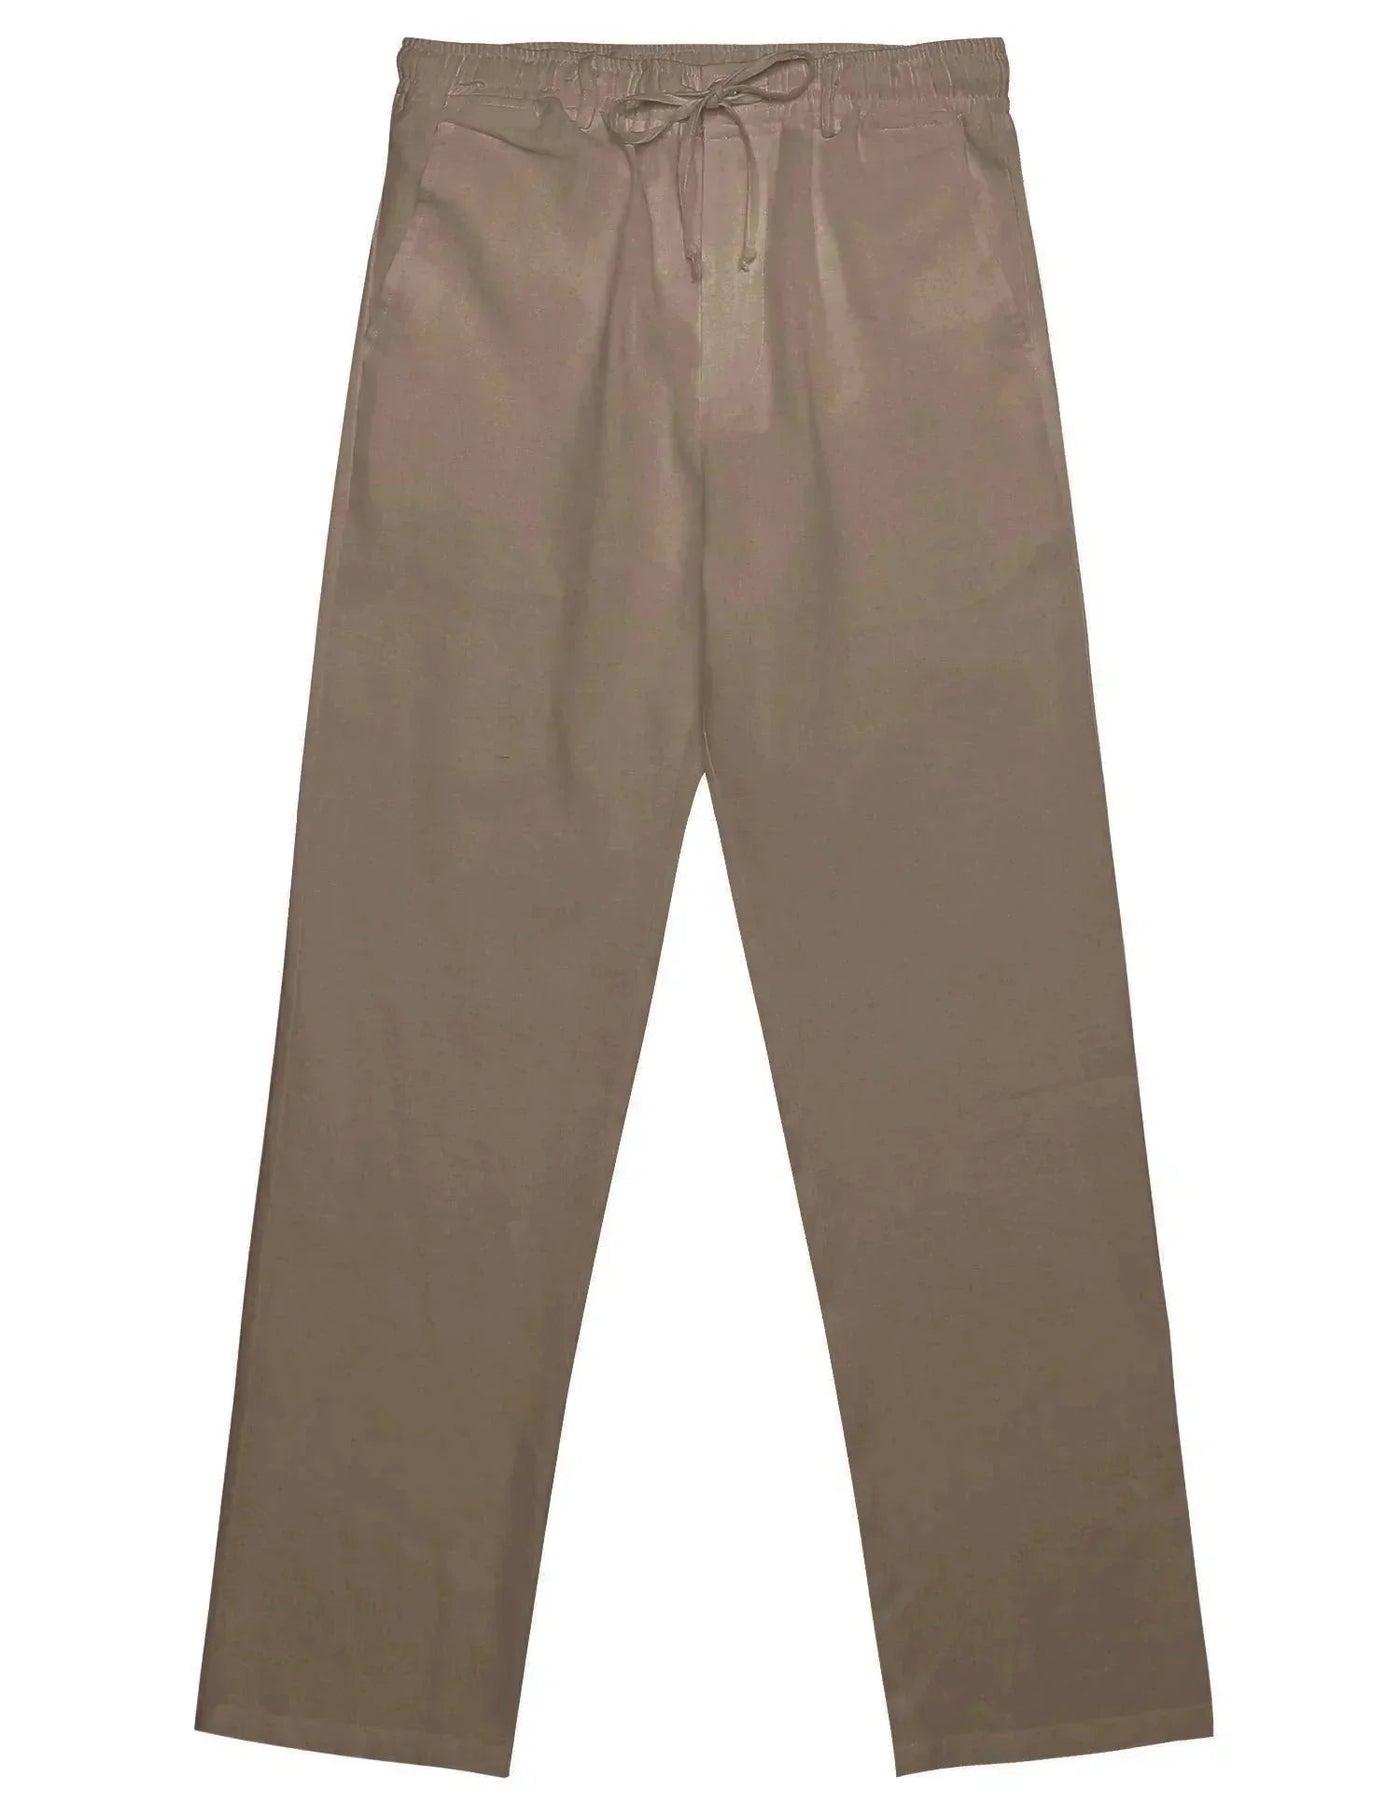 Coofandy Casual Cotton Style Trousers (US Only) Pants coofandy 